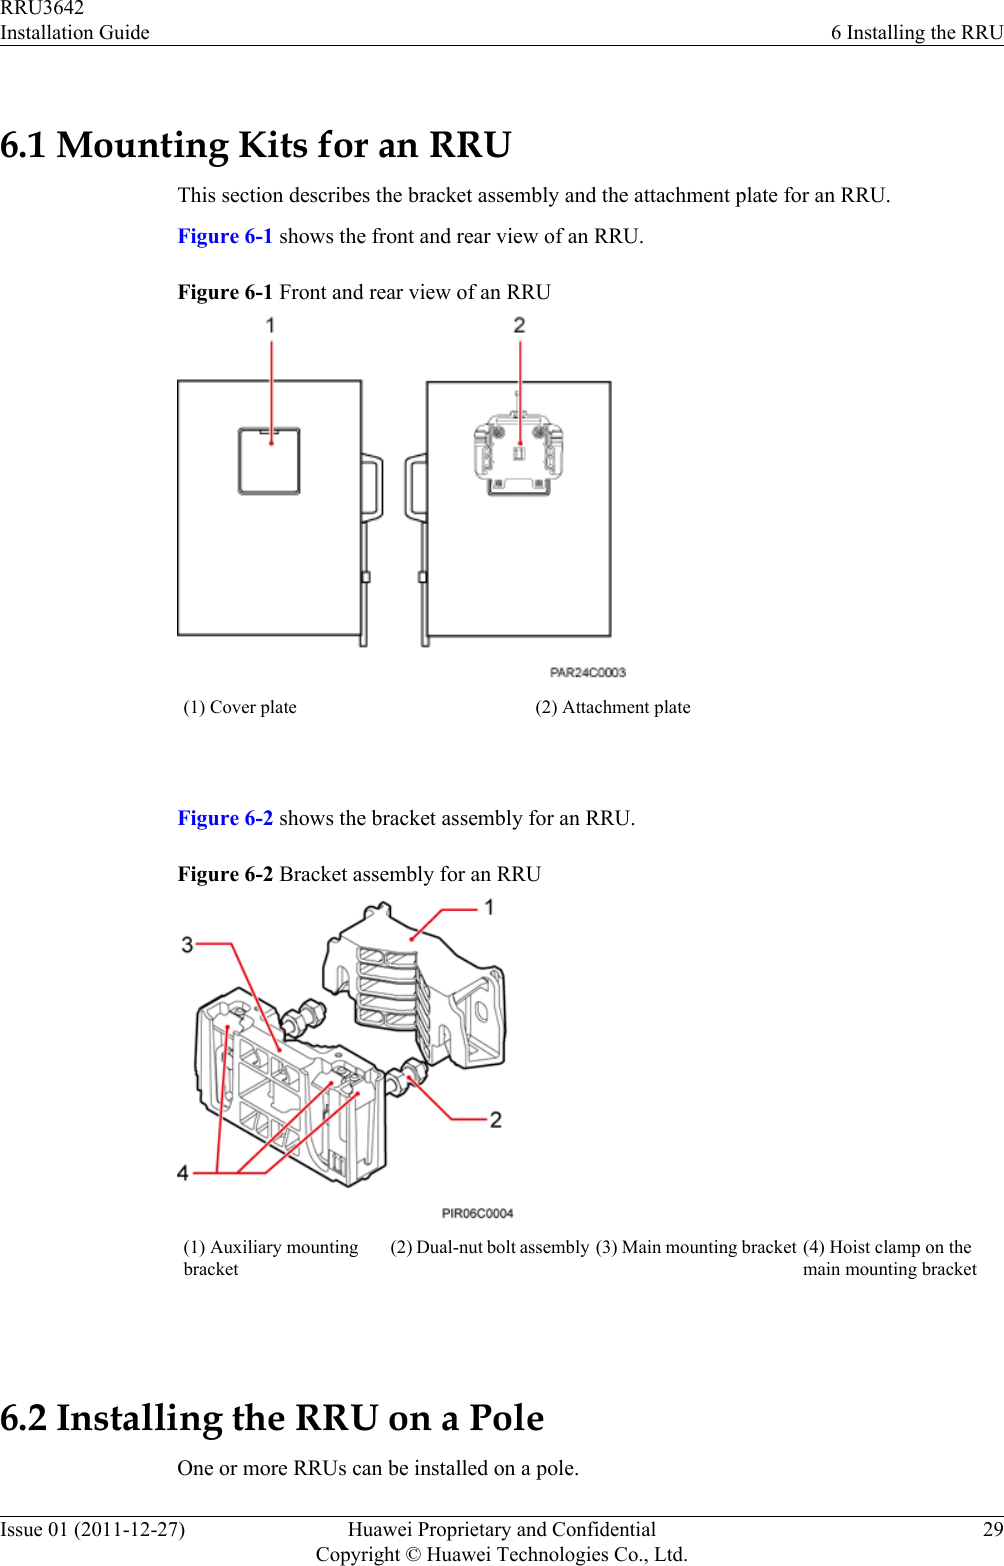 6.1 Mounting Kits for an RRUThis section describes the bracket assembly and the attachment plate for an RRU.Figure 6-1 shows the front and rear view of an RRU.Figure 6-1 Front and rear view of an RRU(1) Cover plate (2) Attachment plate Figure 6-2 shows the bracket assembly for an RRU.Figure 6-2 Bracket assembly for an RRU(1) Auxiliary mountingbracket(2) Dual-nut bolt assembly (3) Main mounting bracket (4) Hoist clamp on themain mounting bracket 6.2 Installing the RRU on a PoleOne or more RRUs can be installed on a pole.RRU3642Installation Guide 6 Installing the RRUIssue 01 (2011-12-27) Huawei Proprietary and ConfidentialCopyright © Huawei Technologies Co., Ltd.29